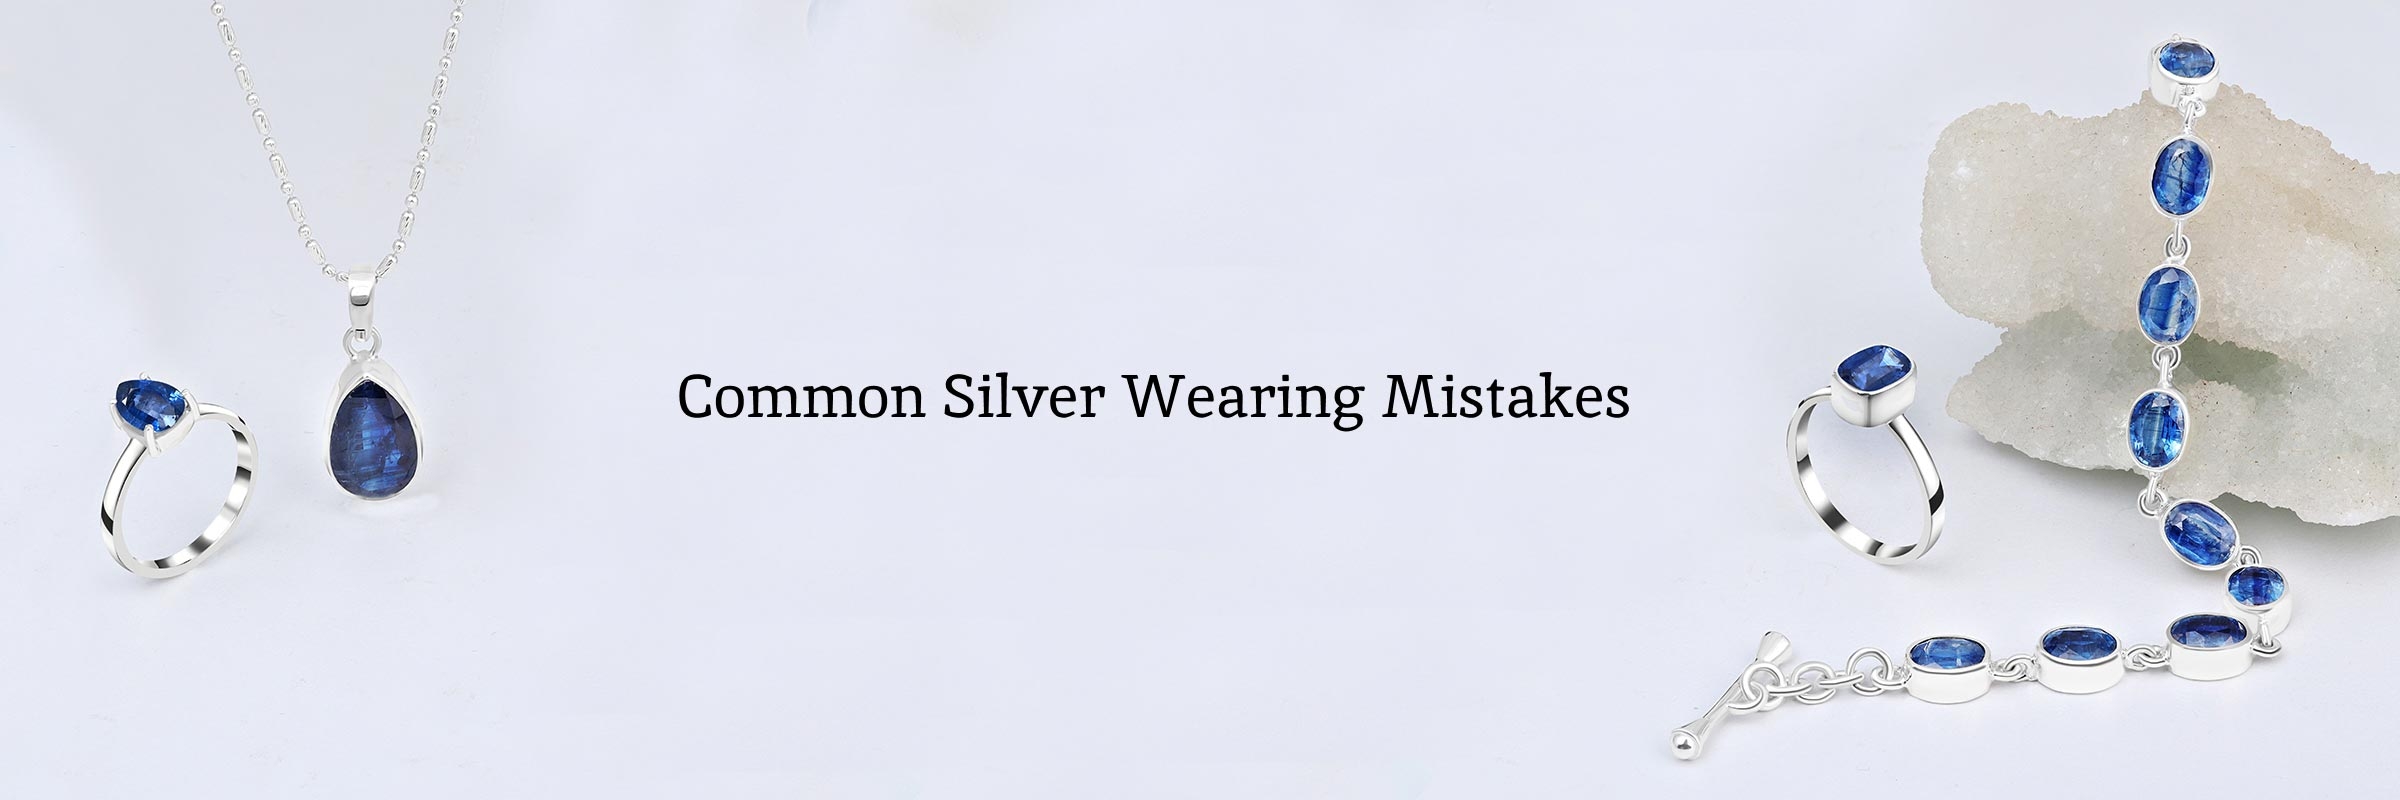 What To Avoid when wearing silver